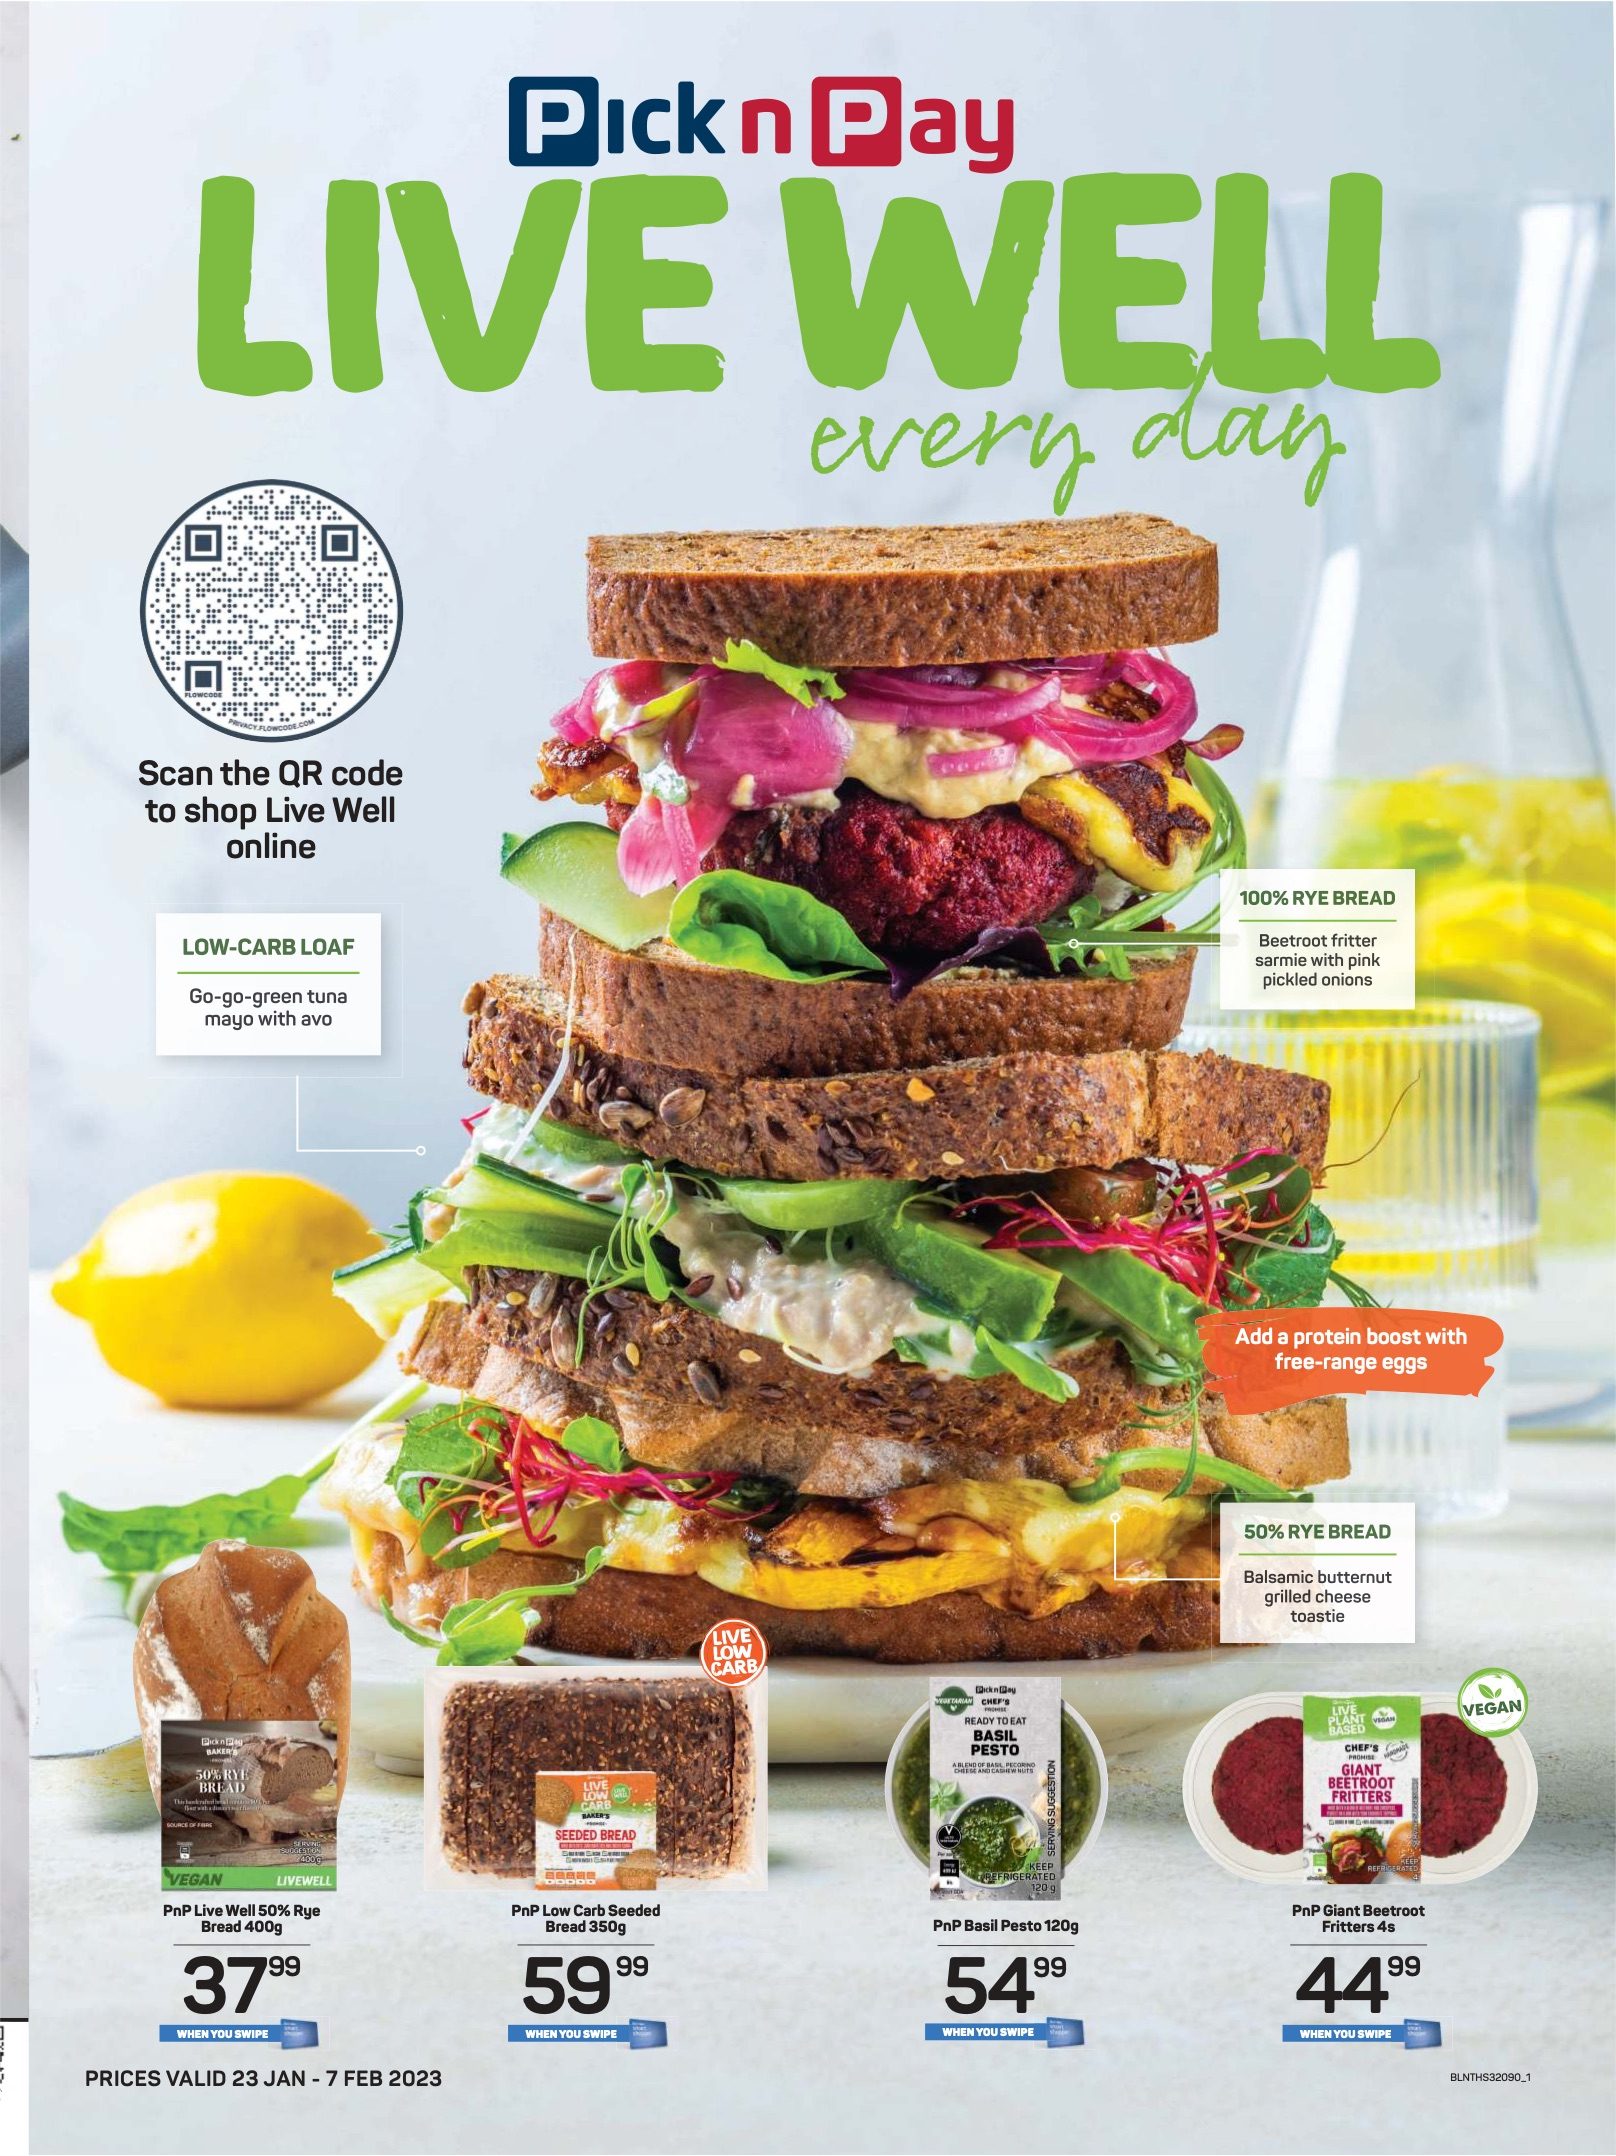 Pick n Pay Specials Livewell Jan 2023